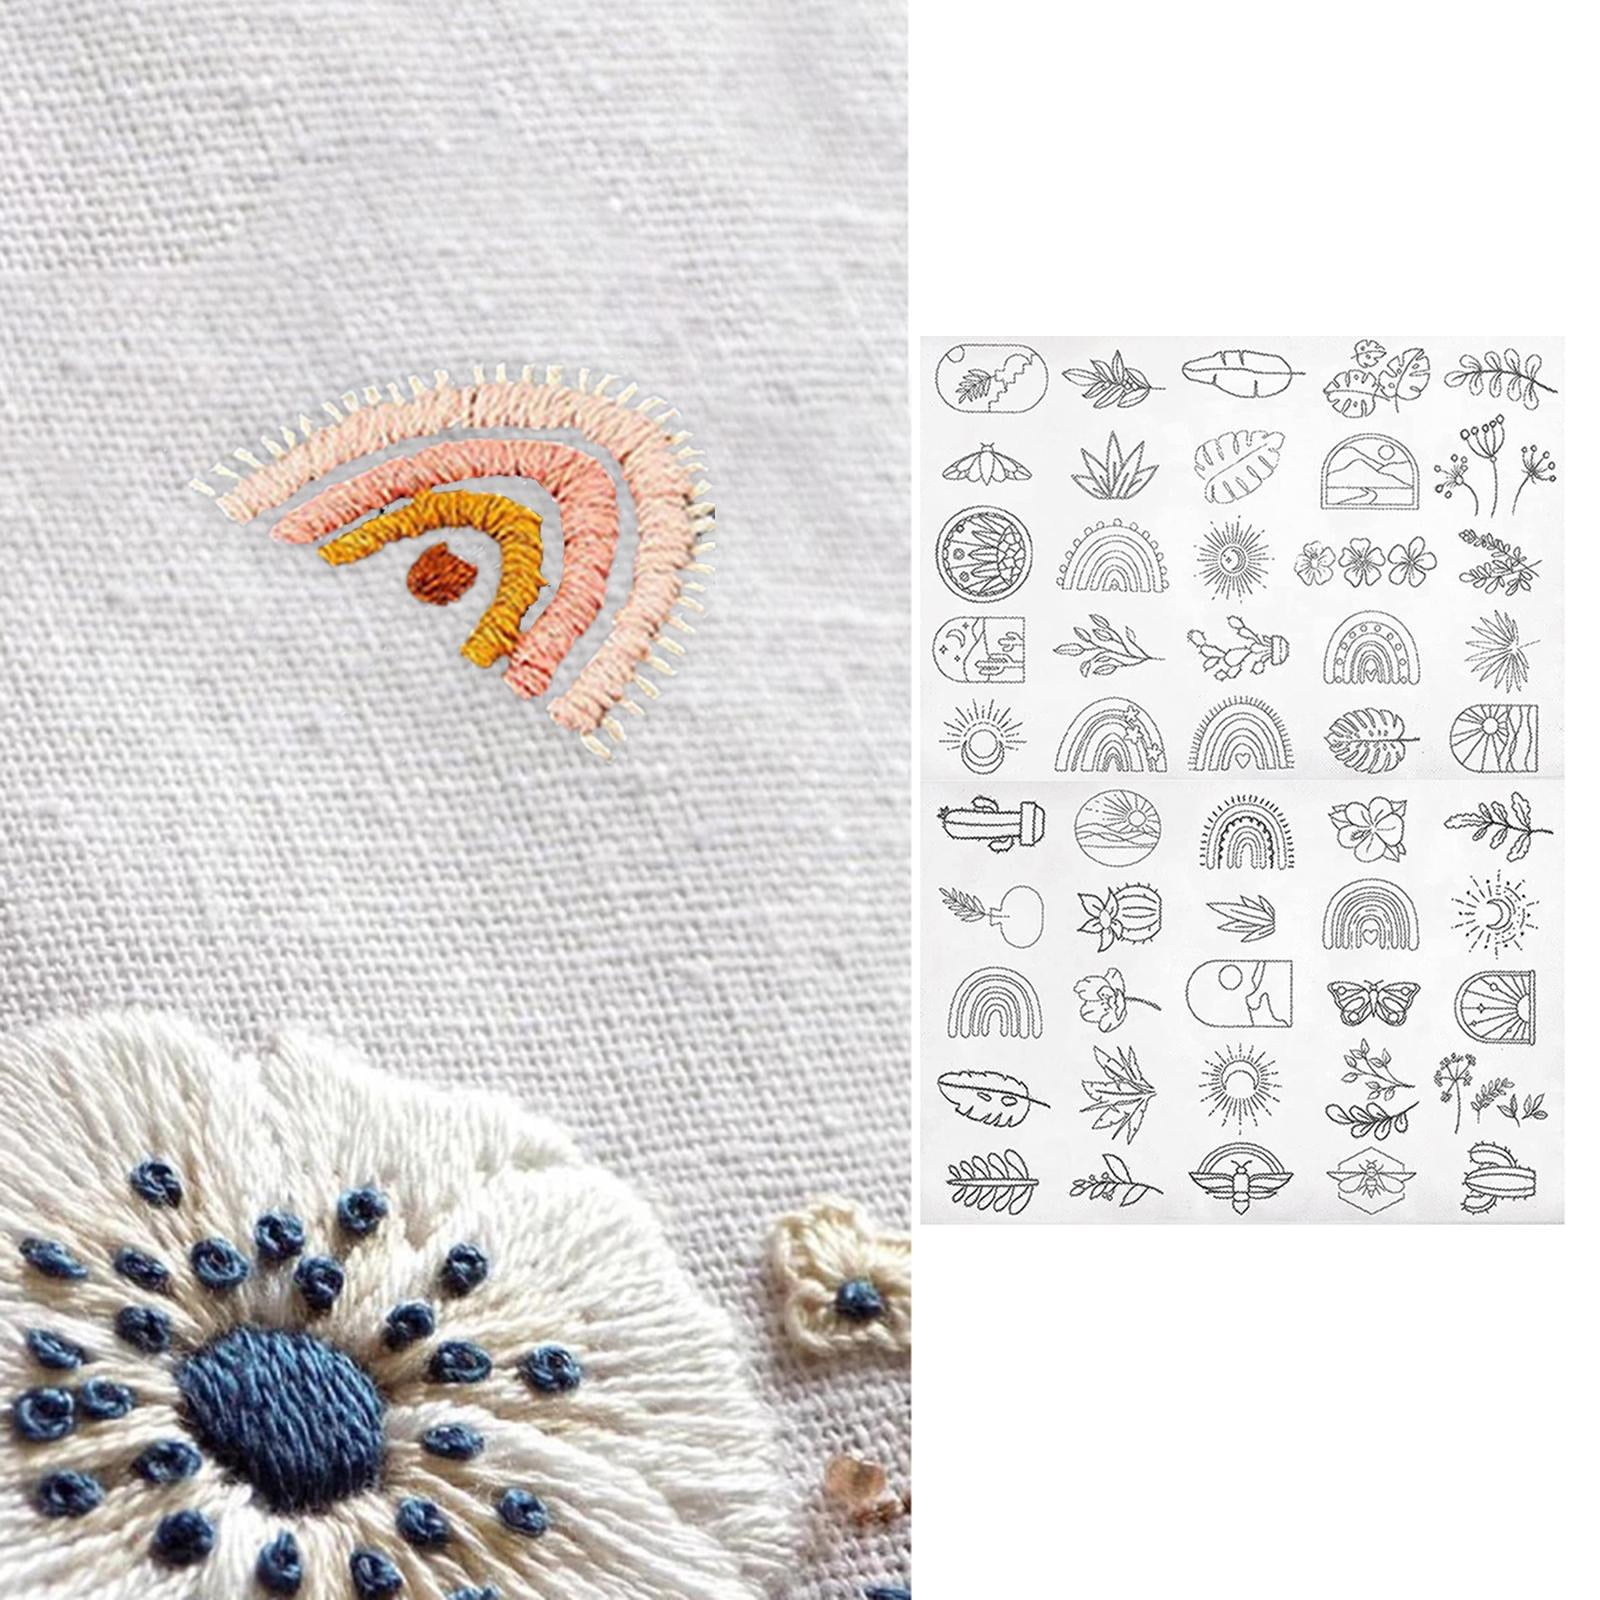 78 Pcs Water Soluble Embroidery Patterns Stabilizers, Stick and Stitch  Embroidery Transfers Paper Tear Away Embroidery Stabilizer with Nature  Patterns